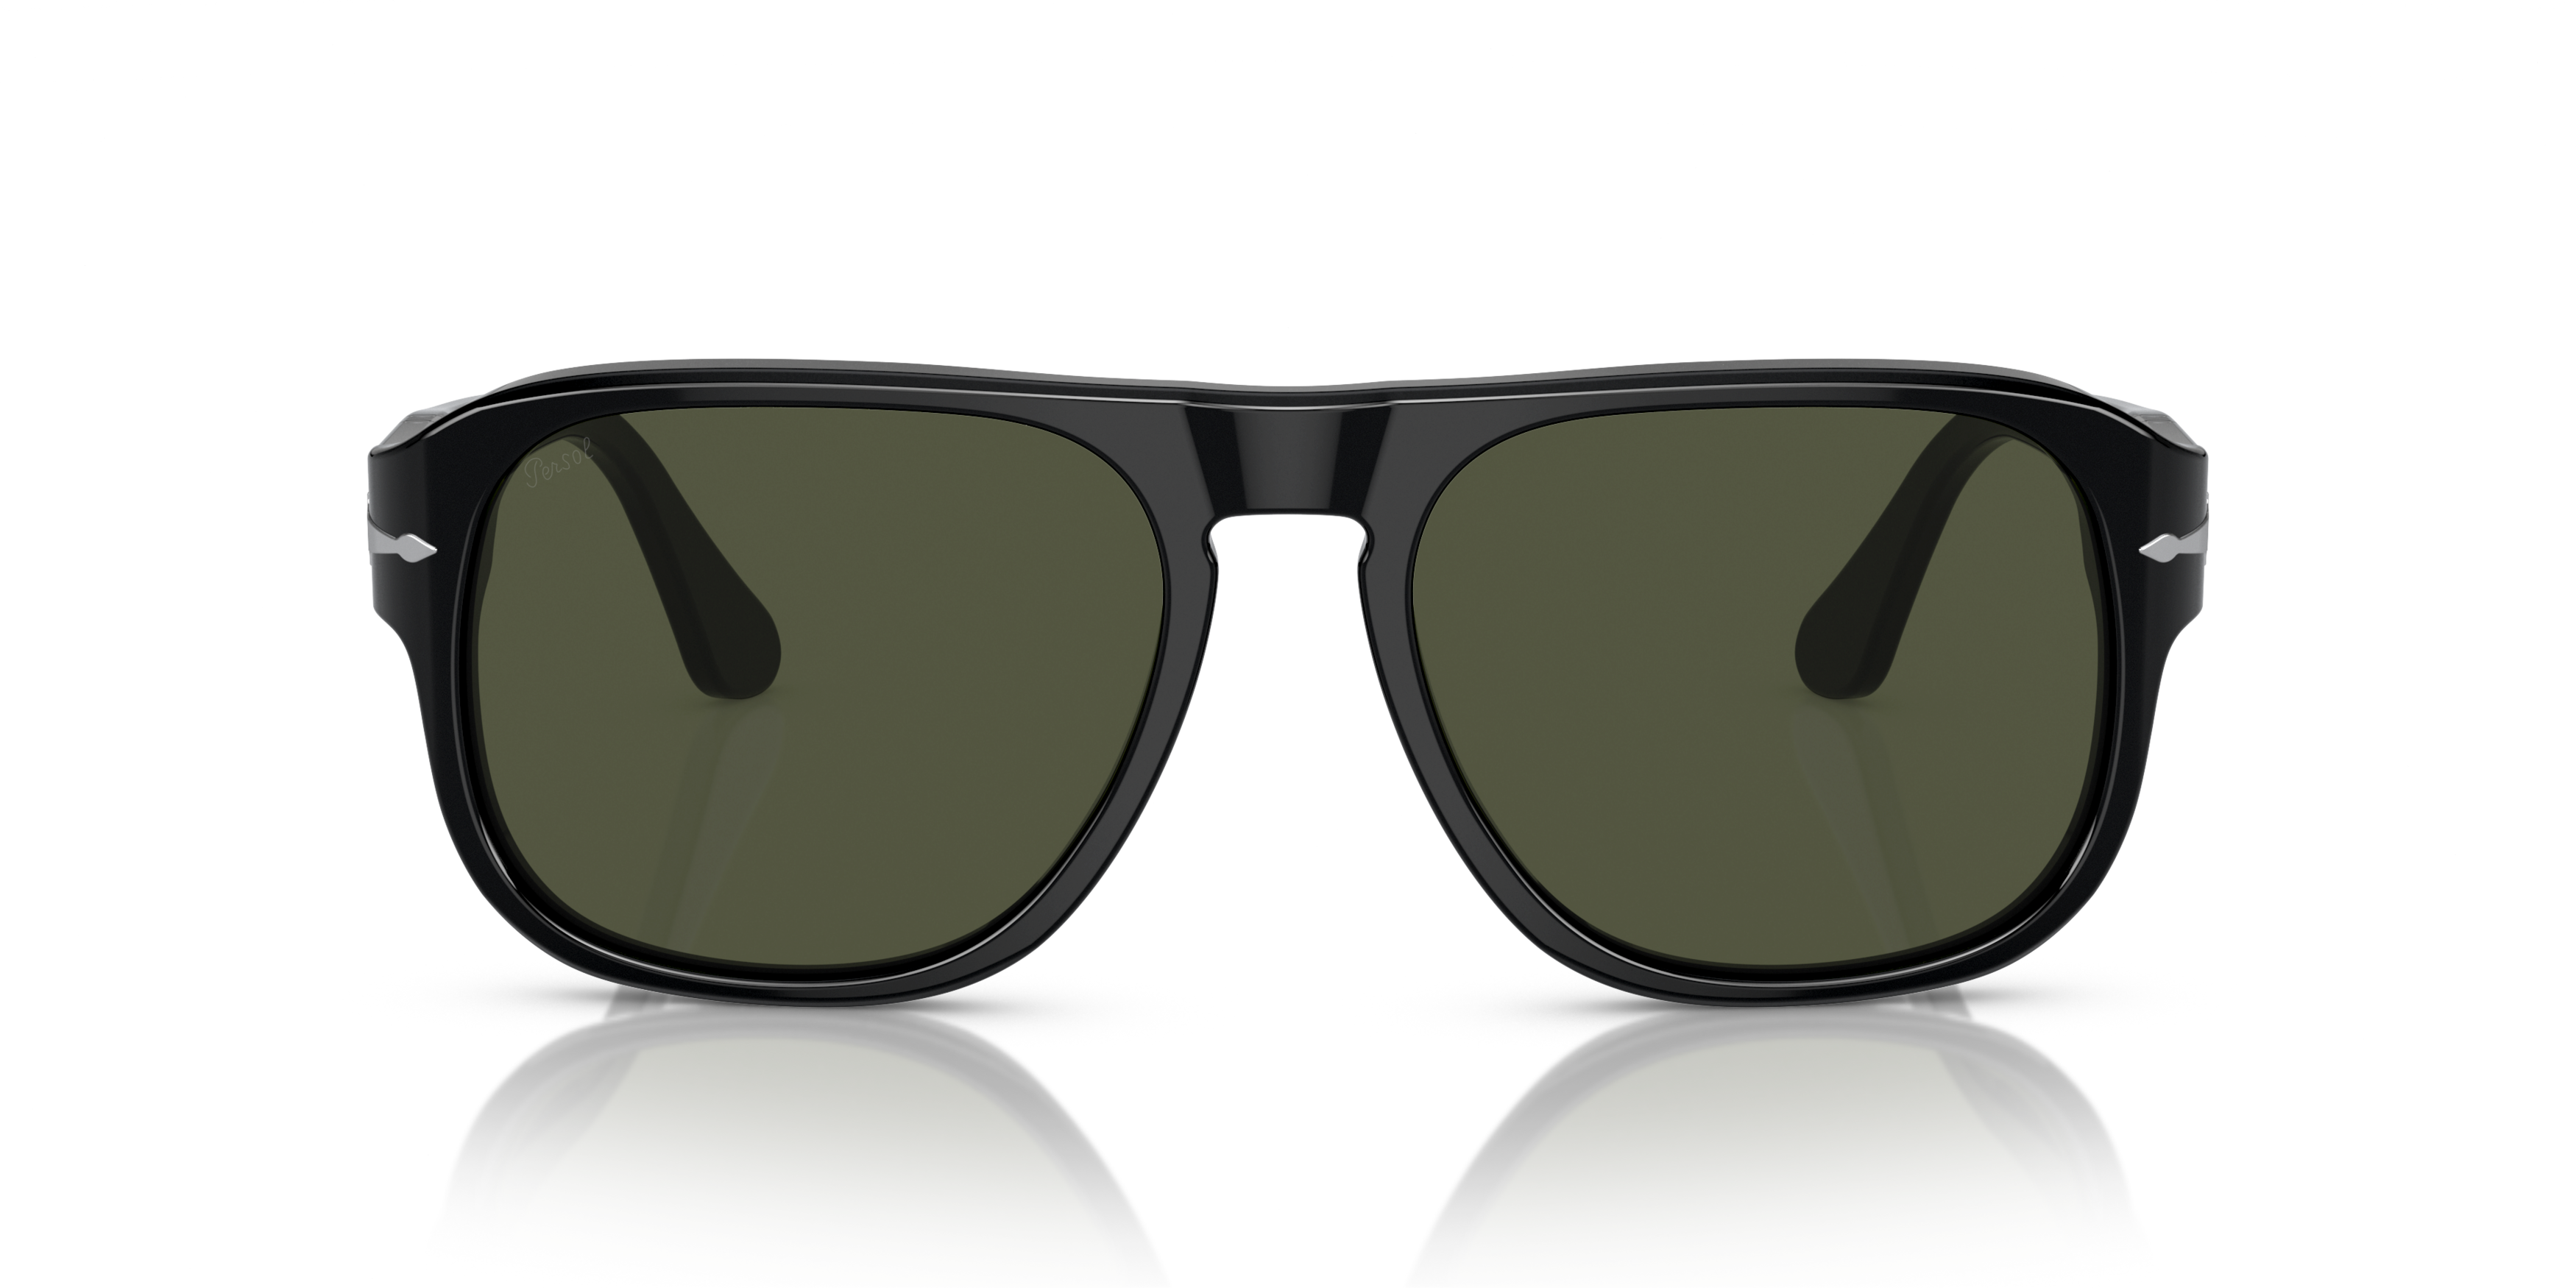 [products.image.front] PERSOL PO3310S 95/31